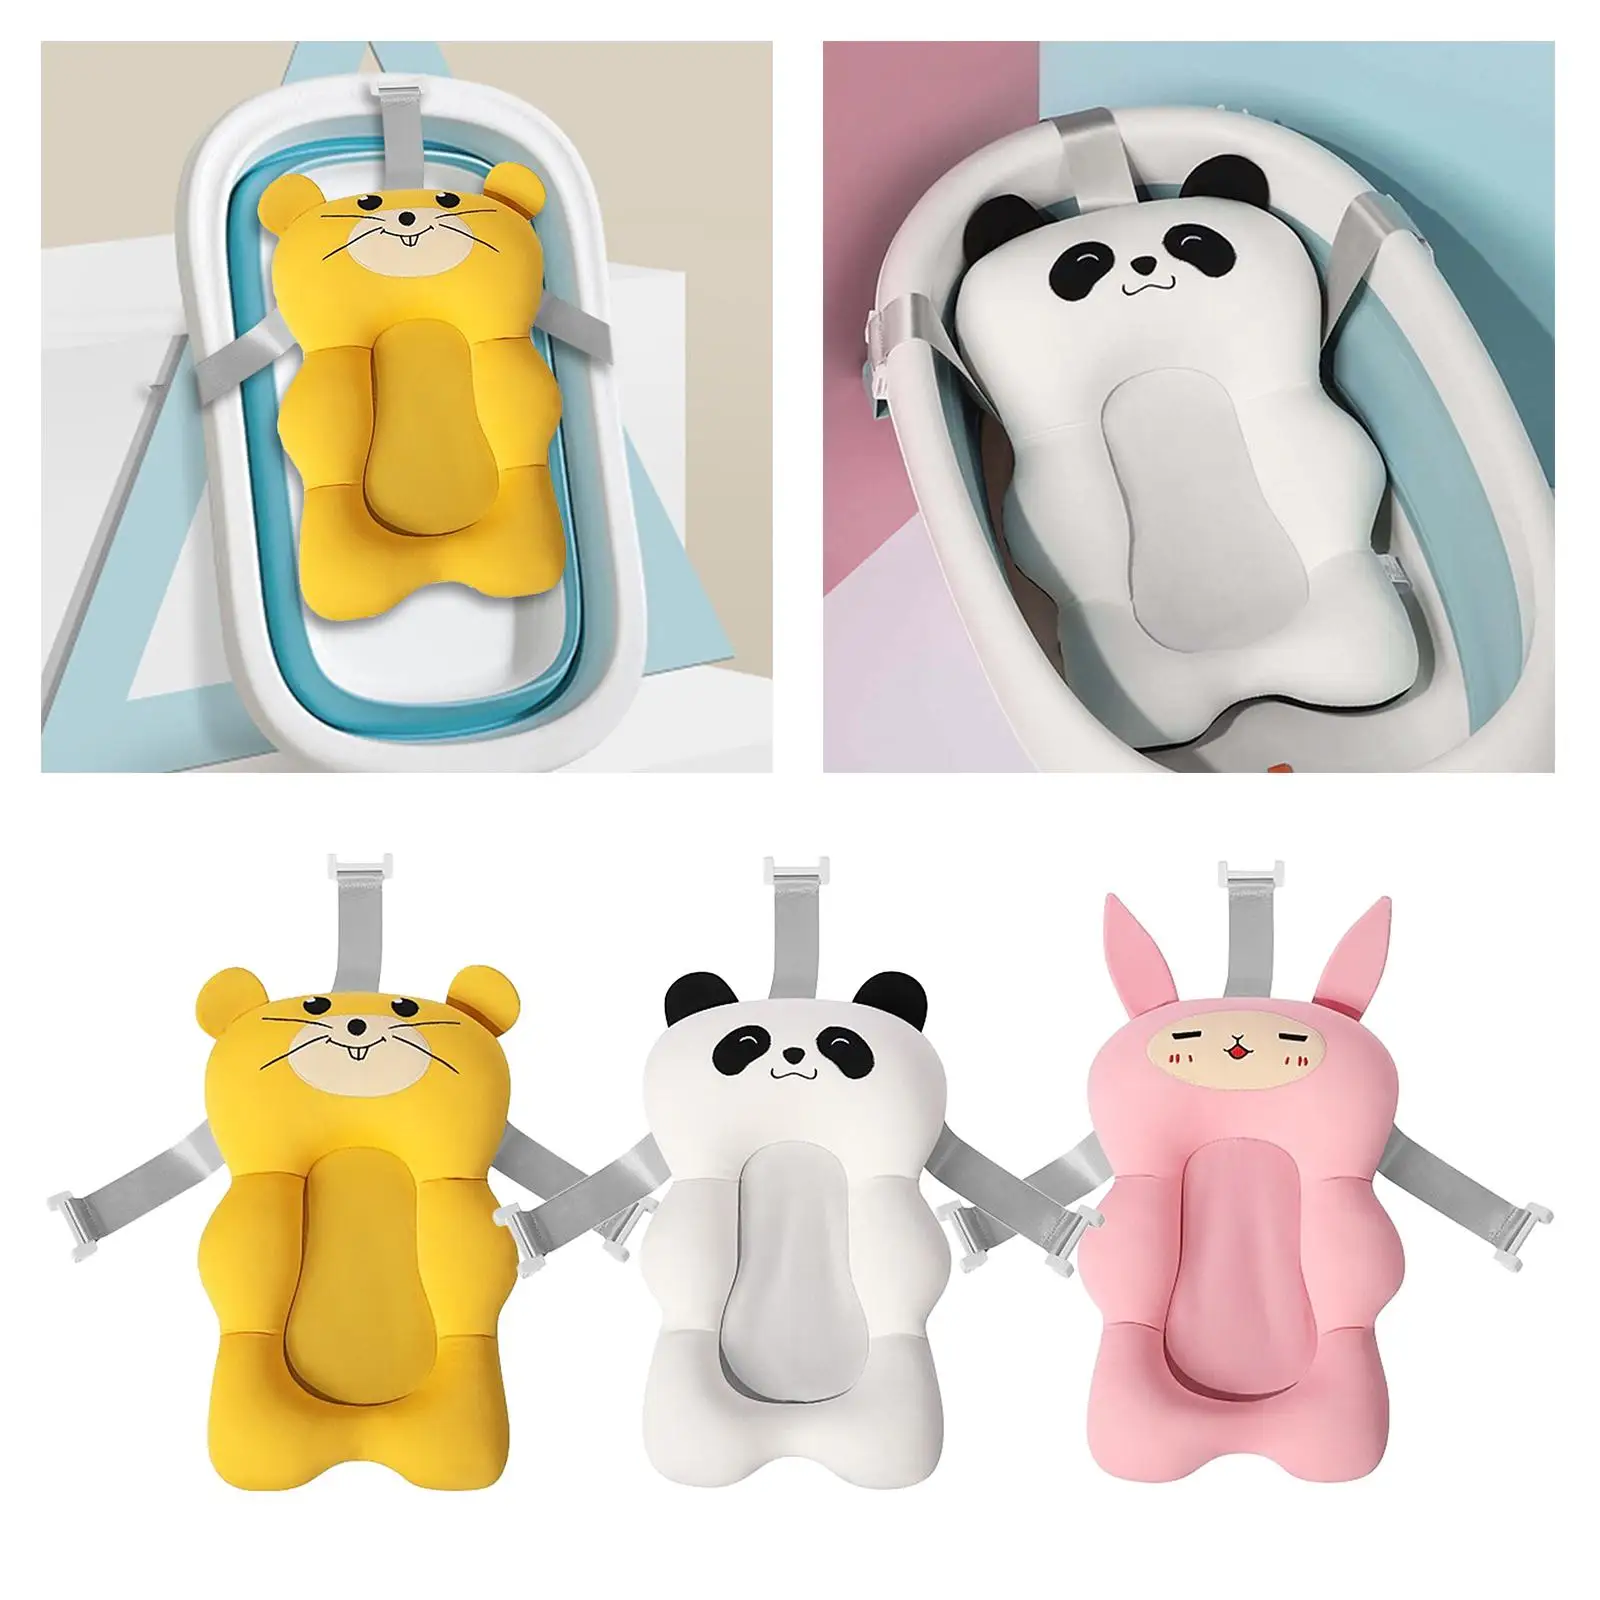 Floating Baby Bath Tub Pad Cute Soft Anti-Slip Portable Bath Support Seat Baby Safety Shower Mat for 0-12 Month Newborn Infant